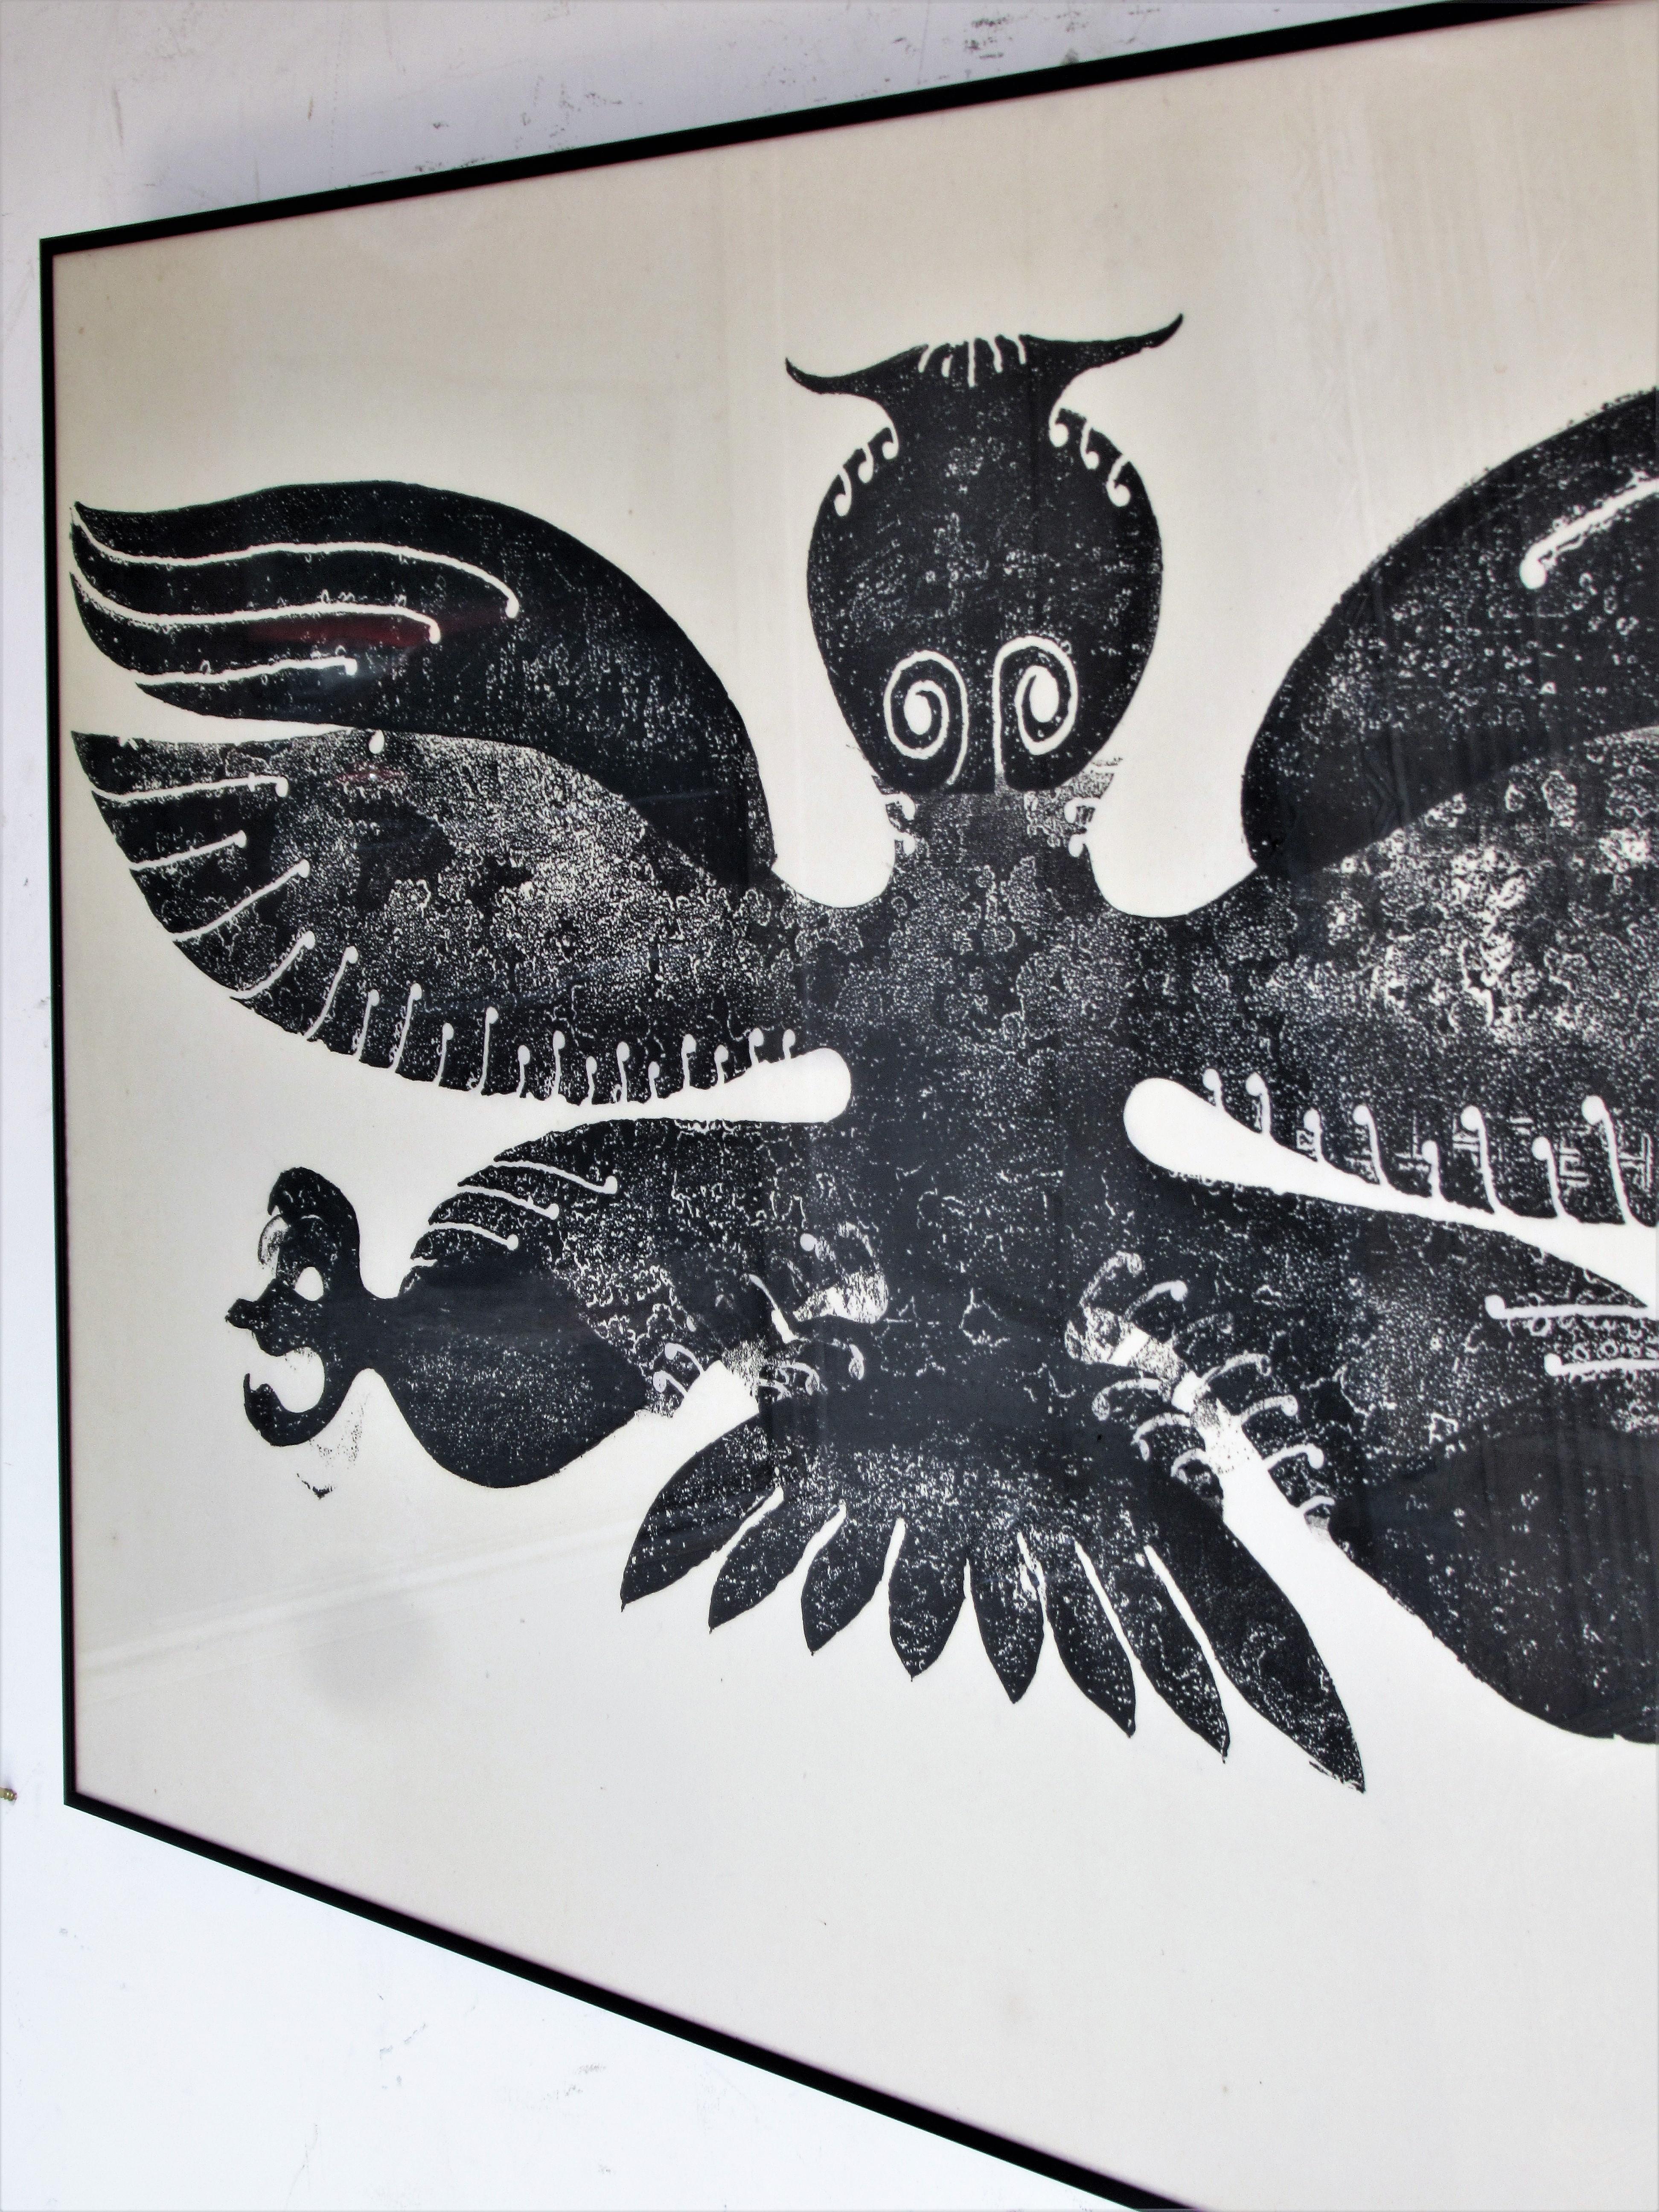 Serigraph print of a large imposing owl. it is set in the original good quality black metal and glass frame. Very strong stylized modernist imagery with an Inuit like feel to it. Circa 1960 - 1970. Look at all pictures and read condition report in